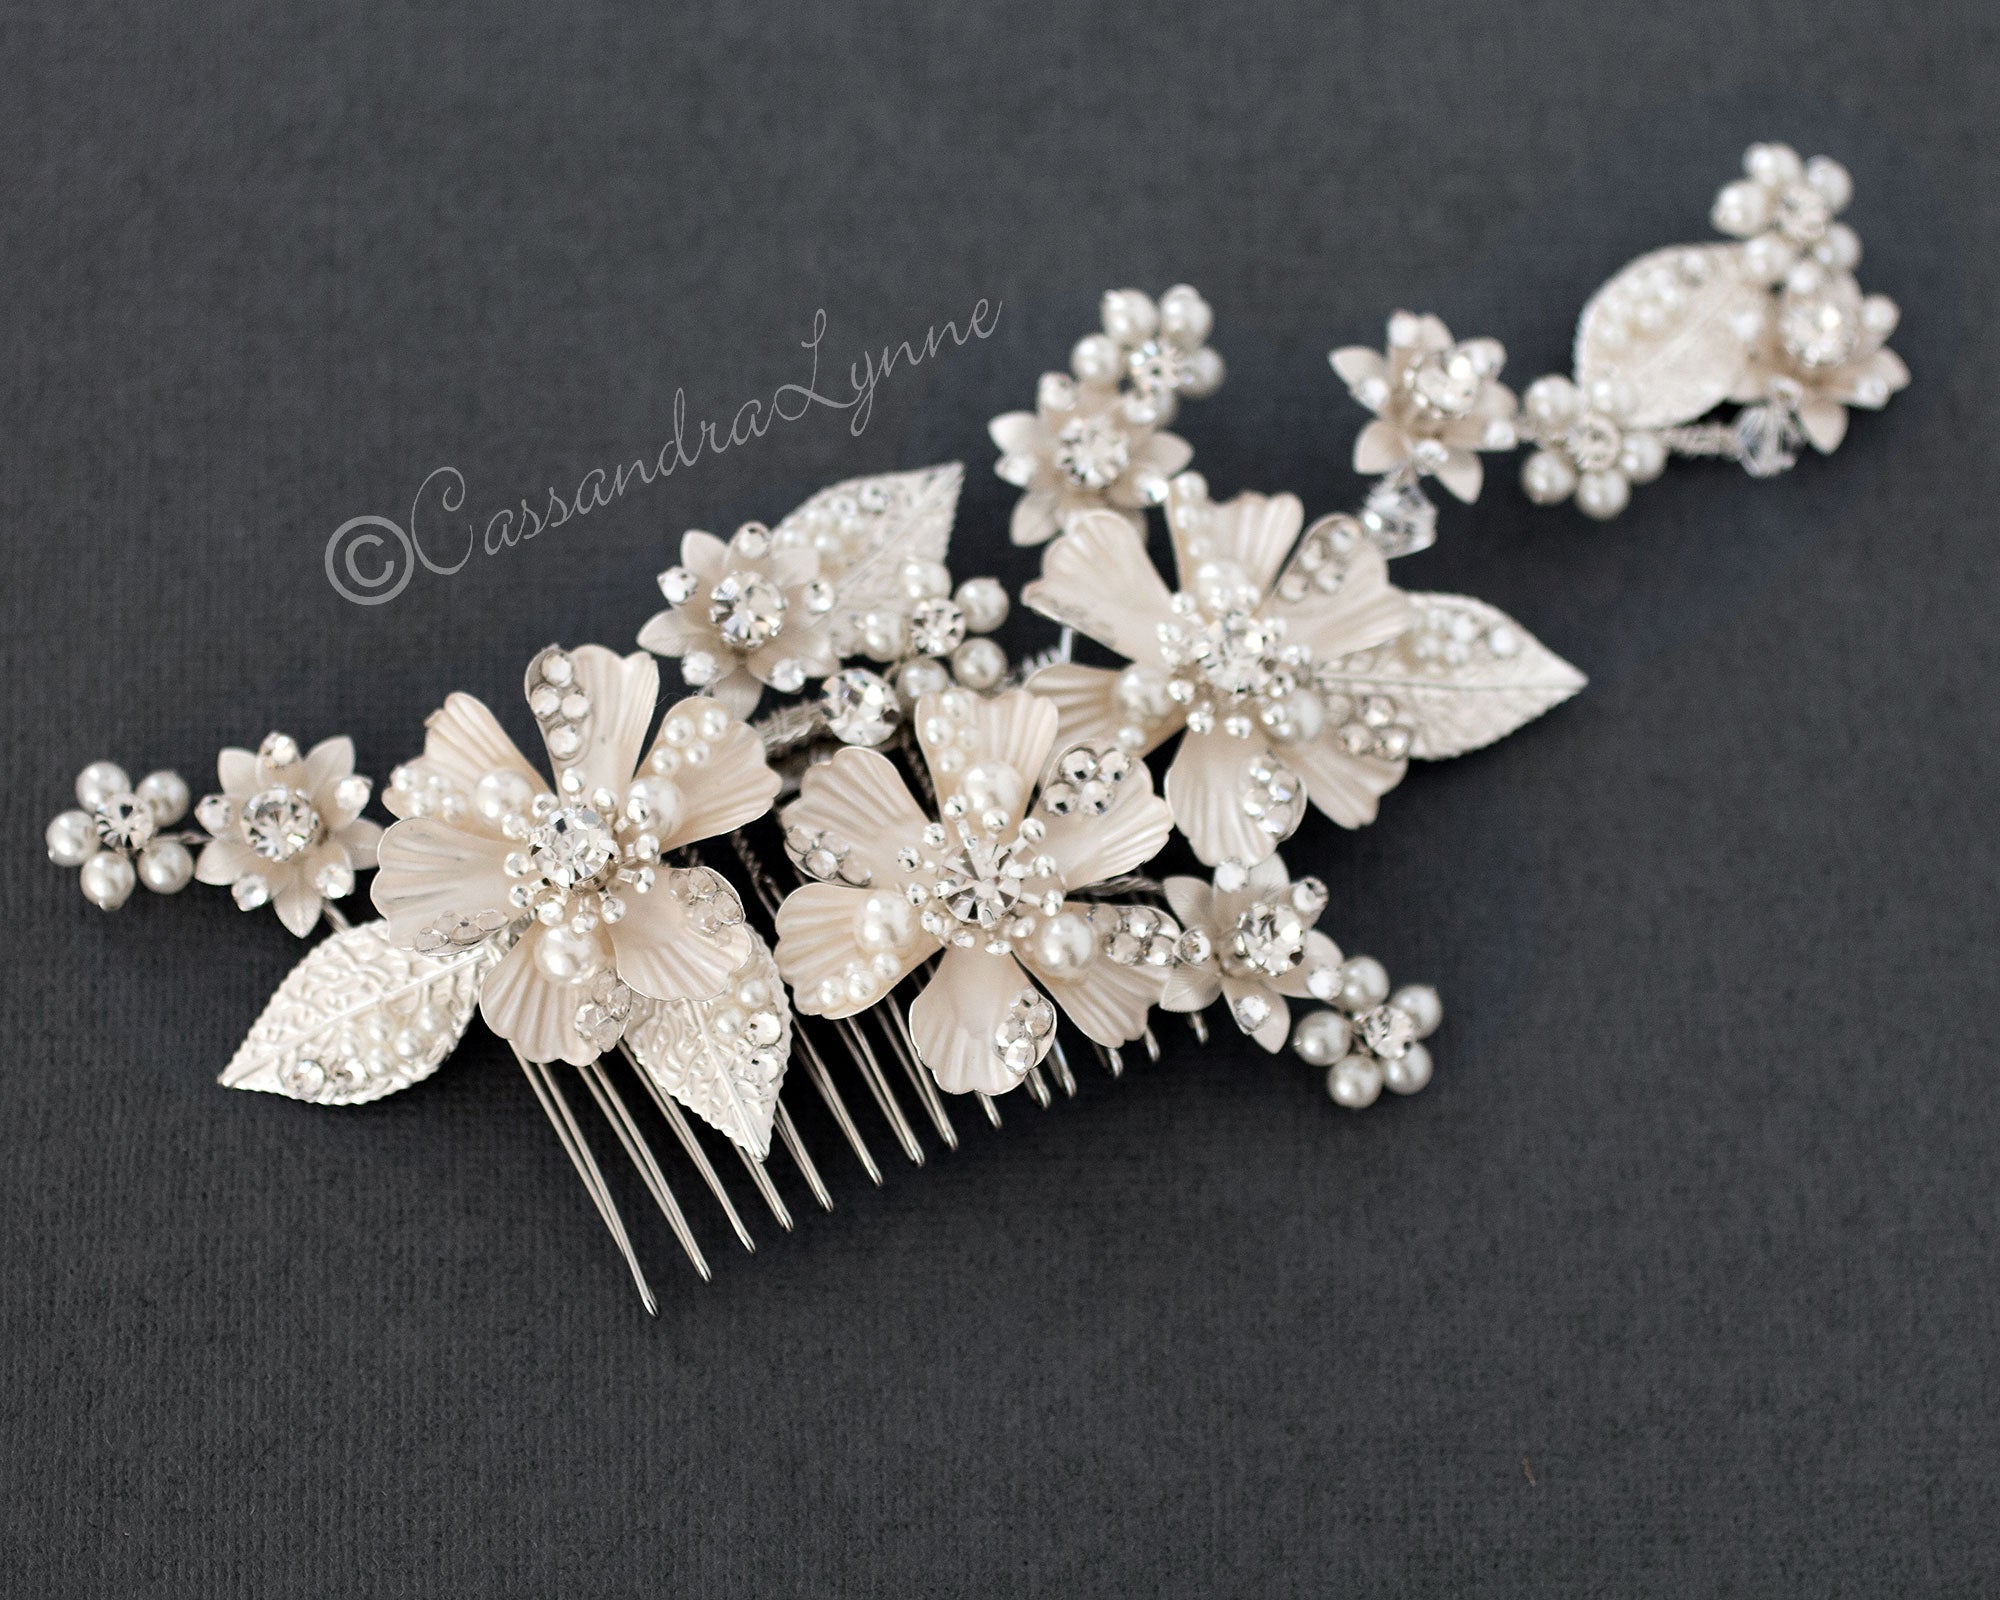 Matte Metal Flowers and Pearls Comb - Cassandra Lynne